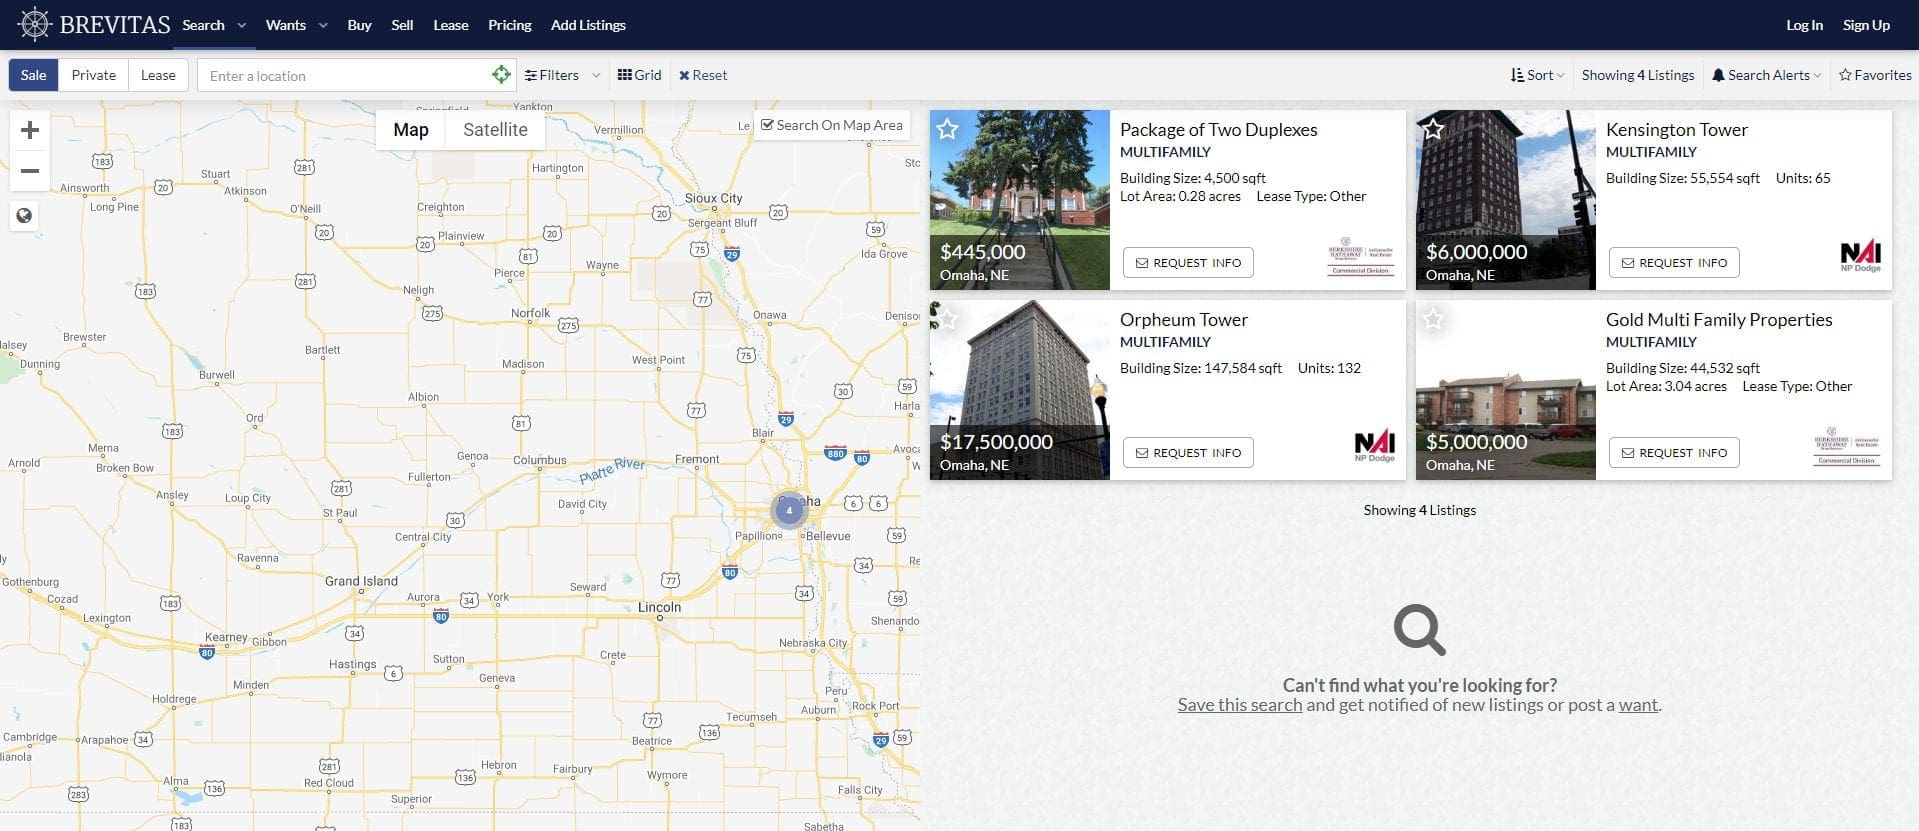 Screenshot of the Brevitas platform in action when searching for a duplex for sale